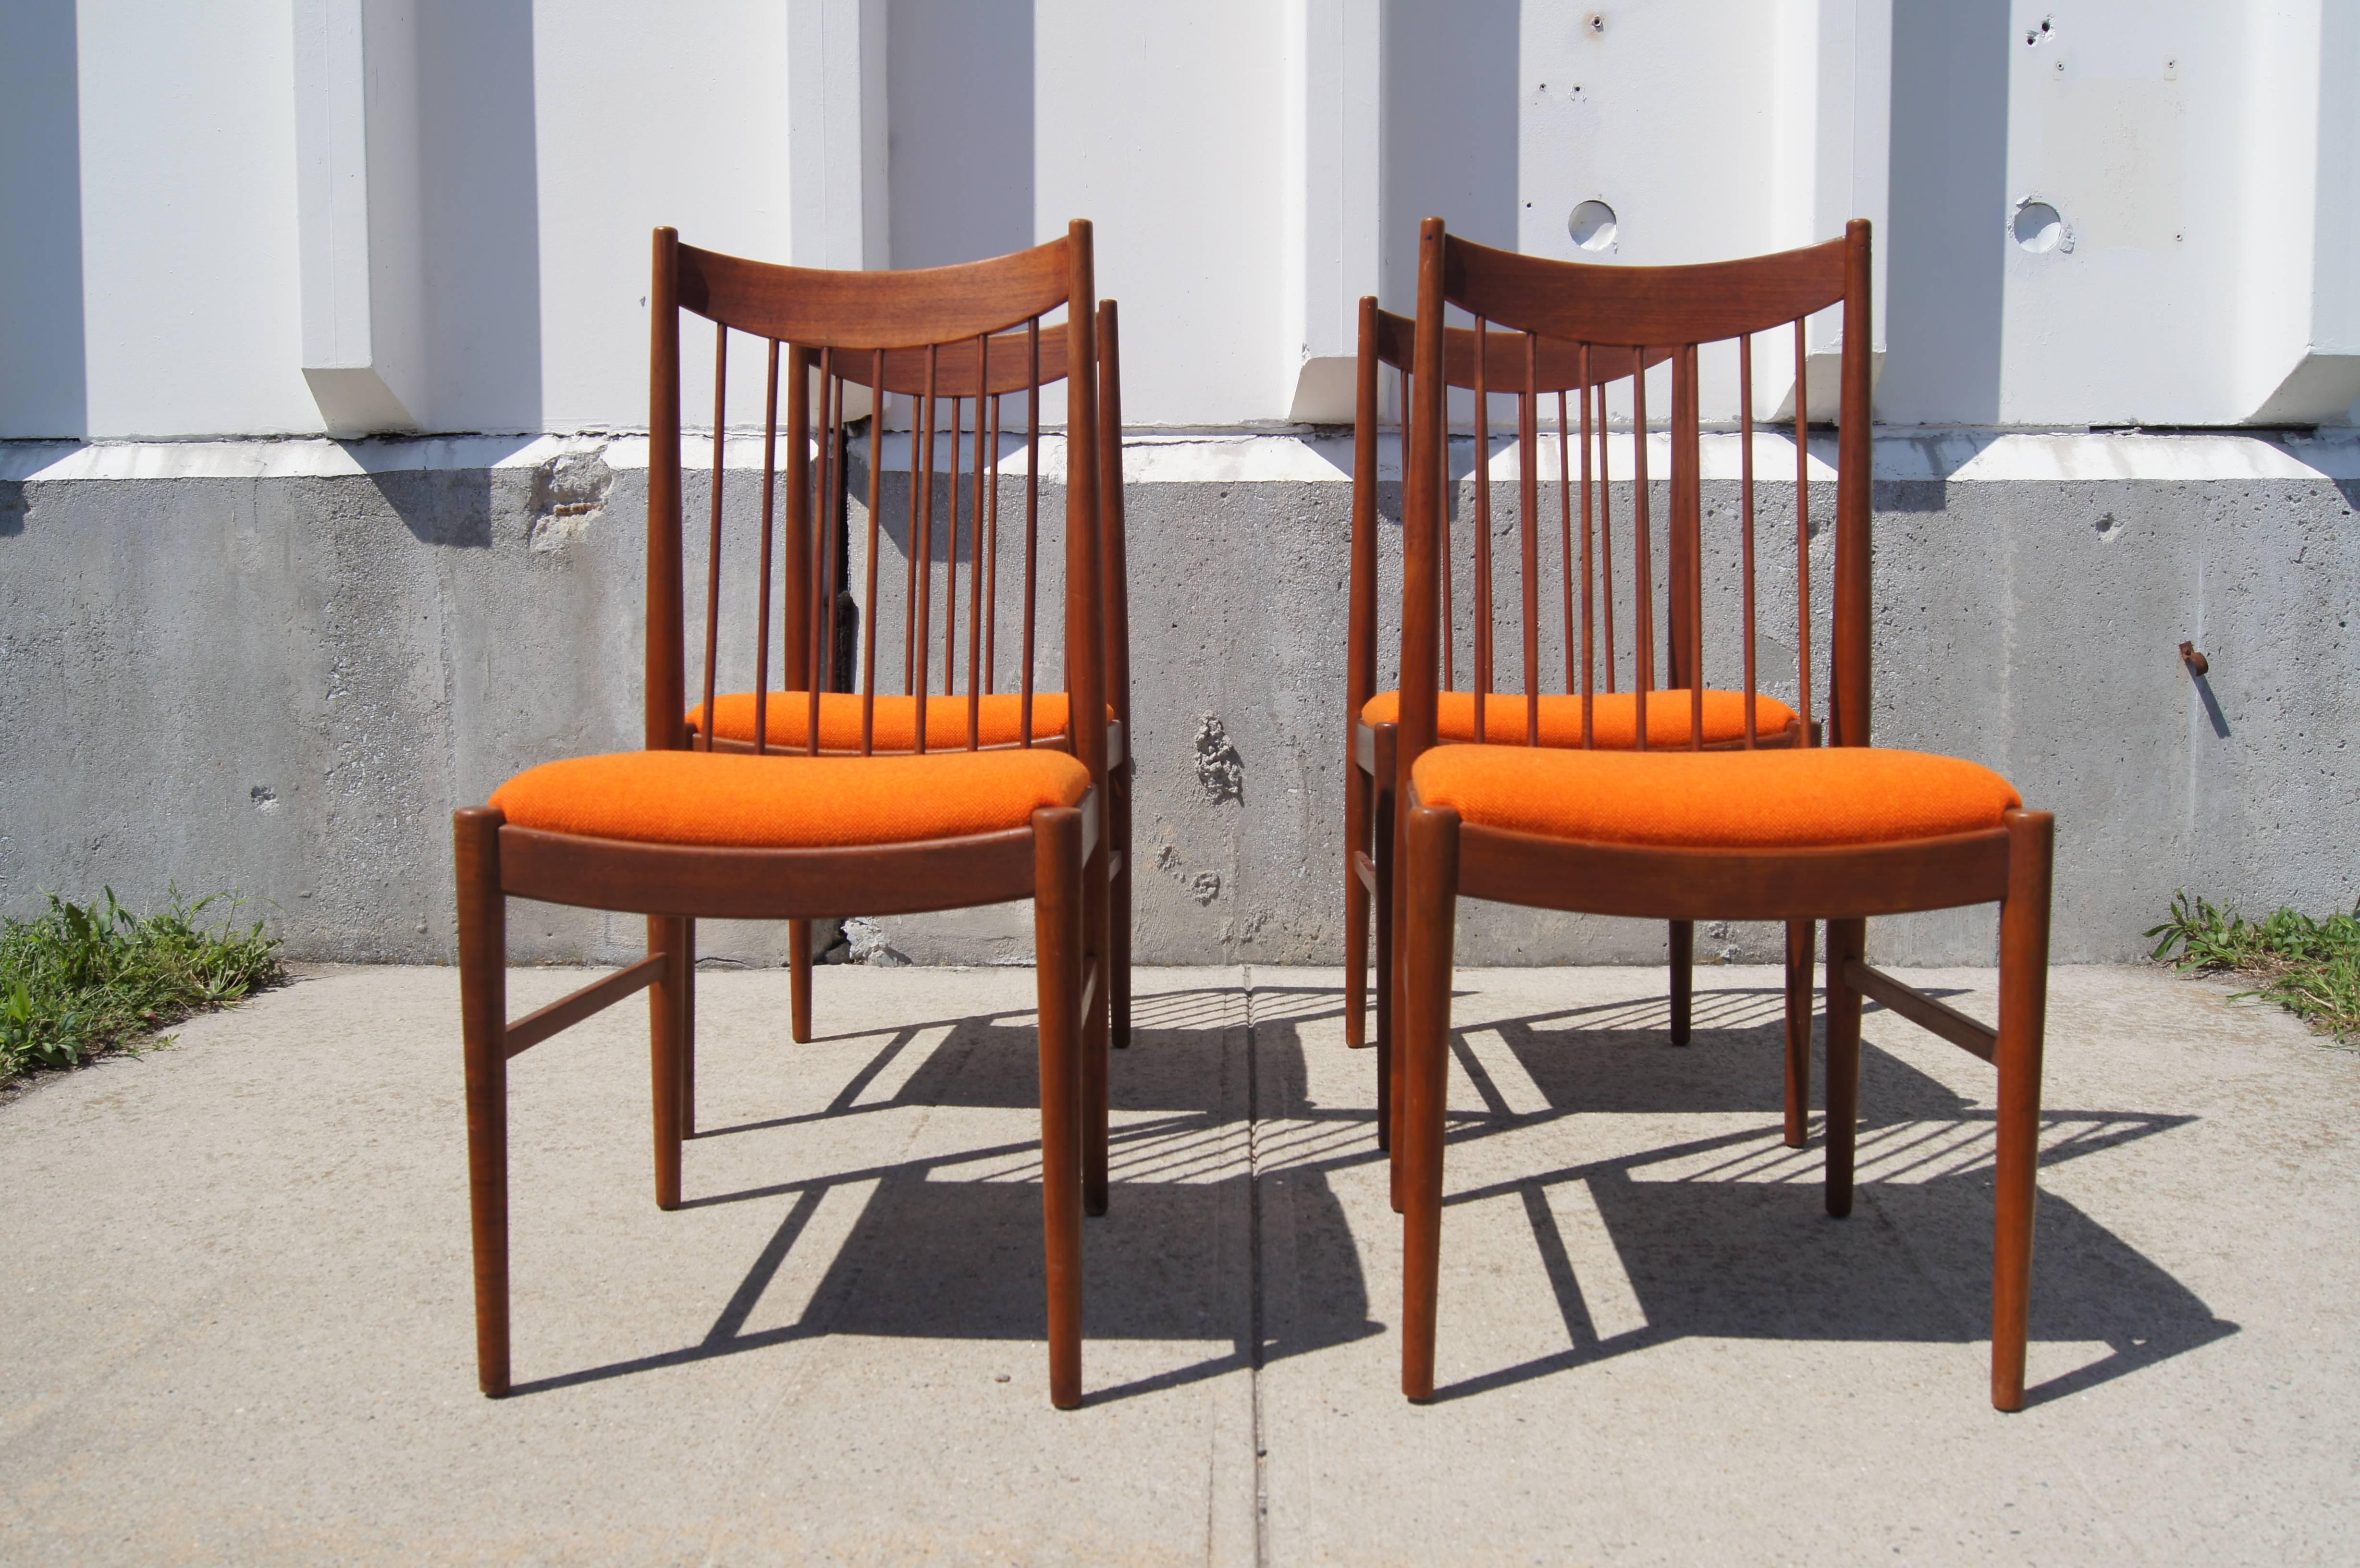 Arne Vodder designed these high-back dining chairs for Sibast in the 1960s. They feature slender teak frames with slanted dowels joined to a graceful curved backrest. They have been reupholstered with Maharam's Hallingdal wool textile in a burnt